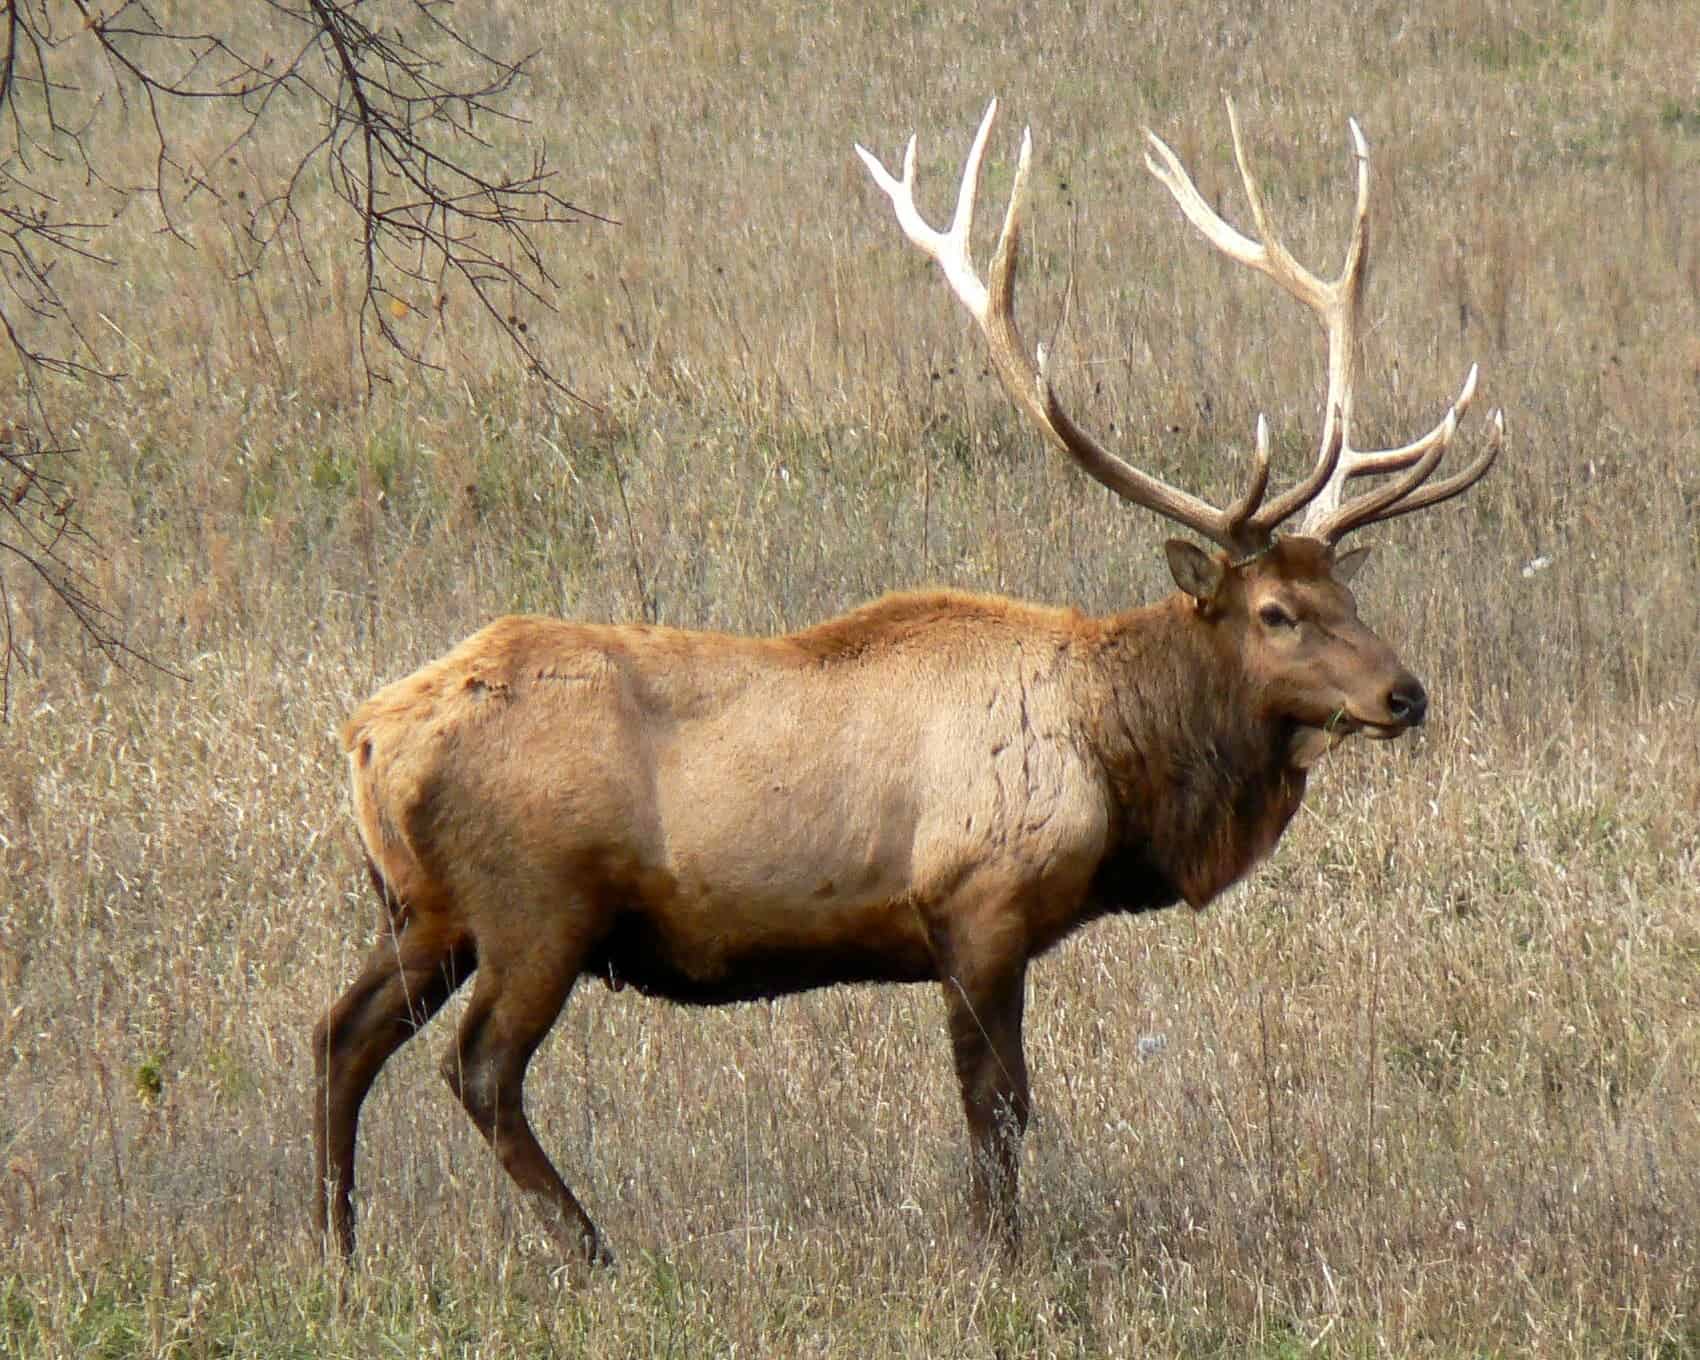 A male elk's horns are an indication of strength and fertility, traits which are valued by potential mates.